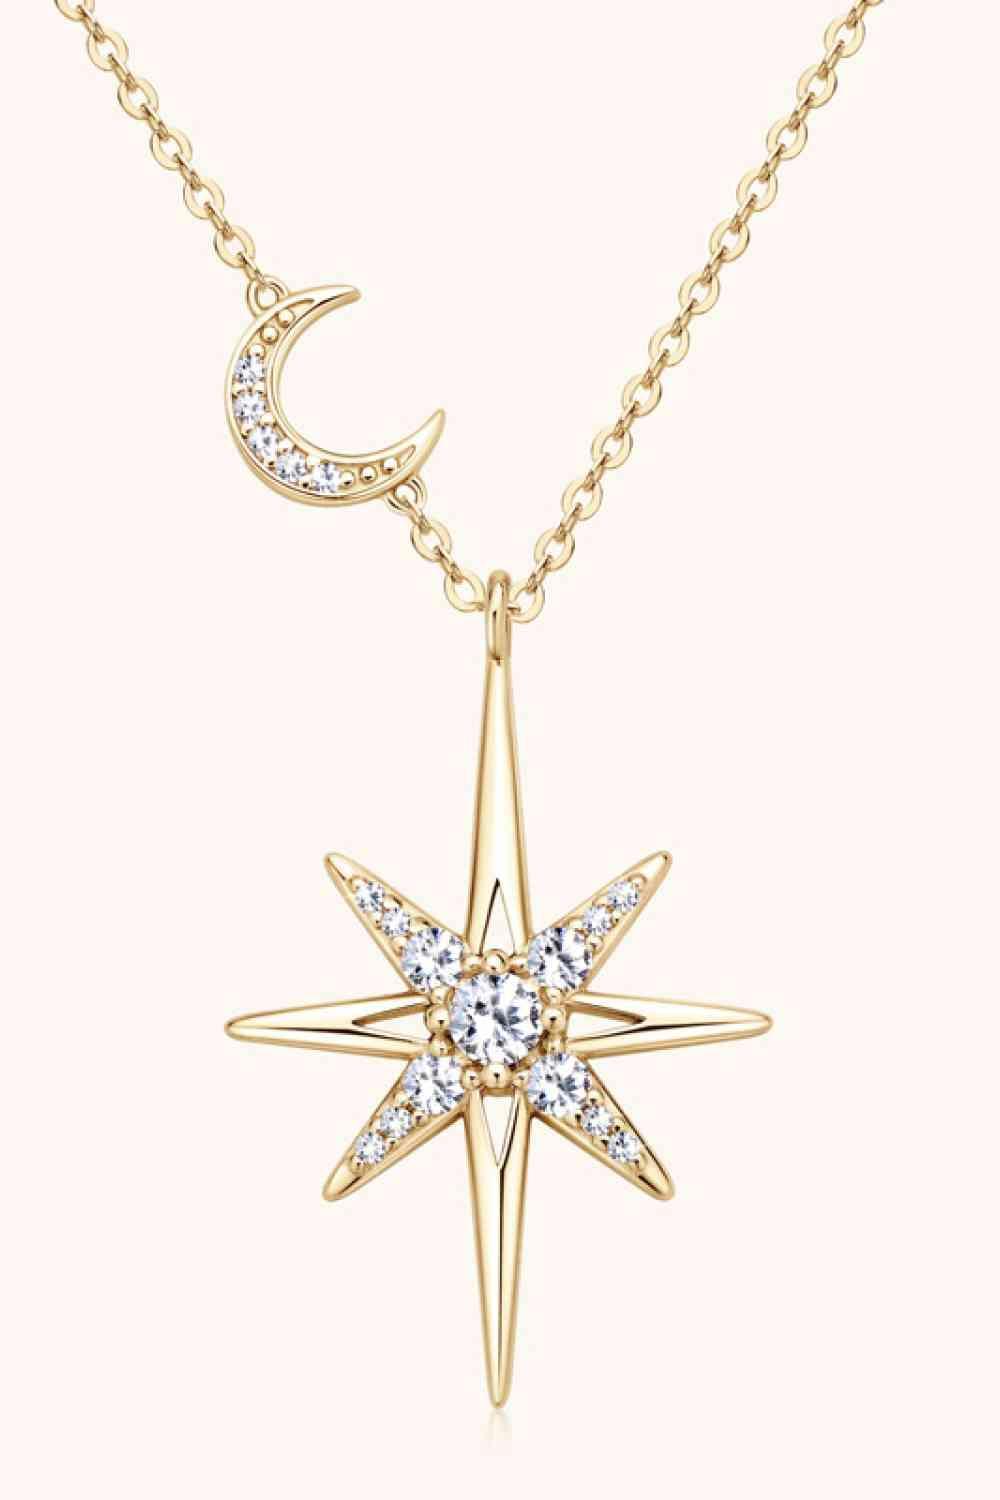 a gold necklace with a star and moon